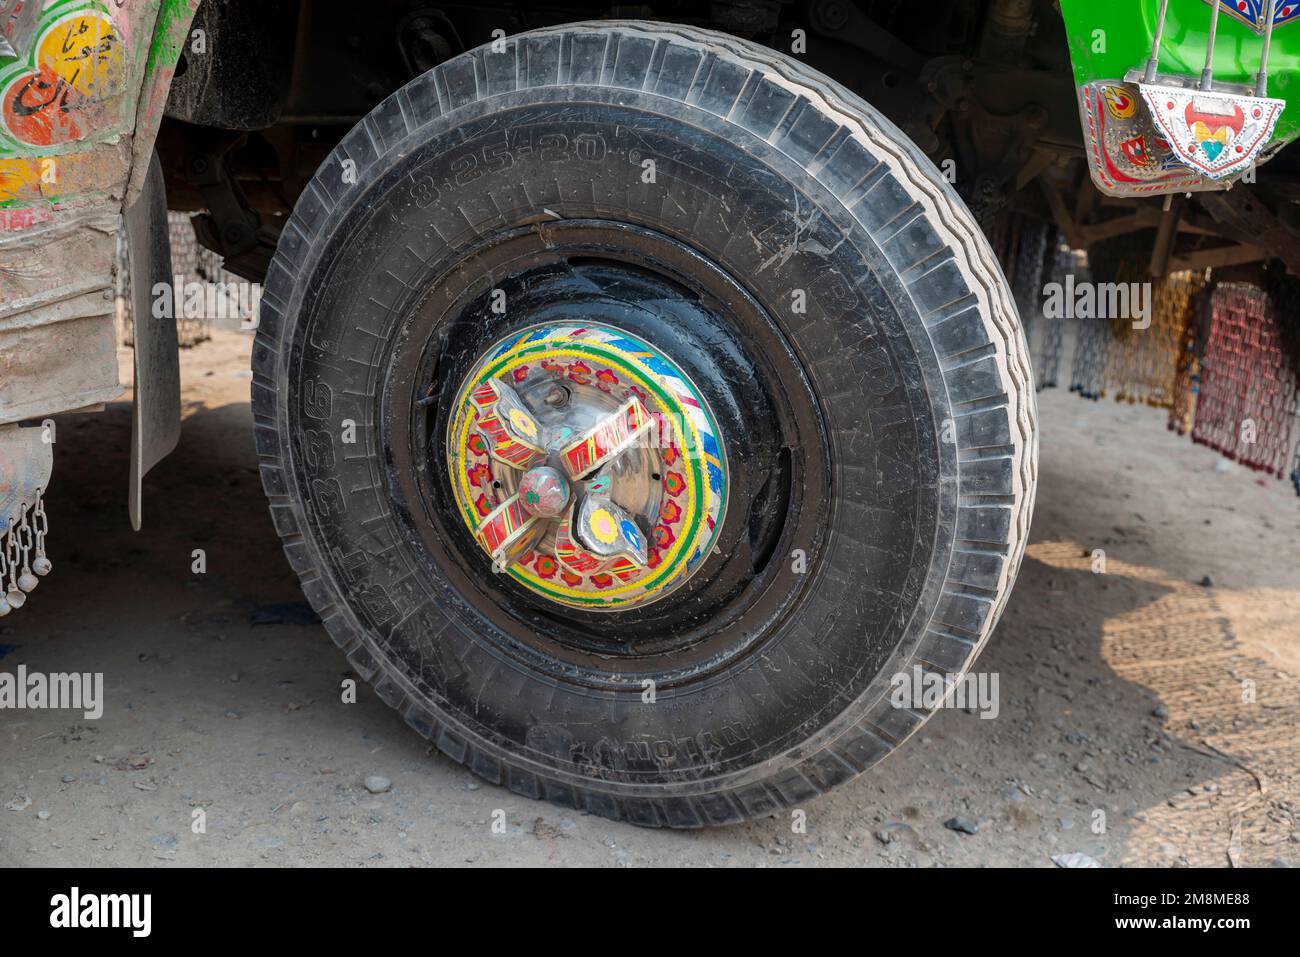 Detail of a decorated wheel rim of a painted painted bus, Peshawar, Pakistan Stock Photo